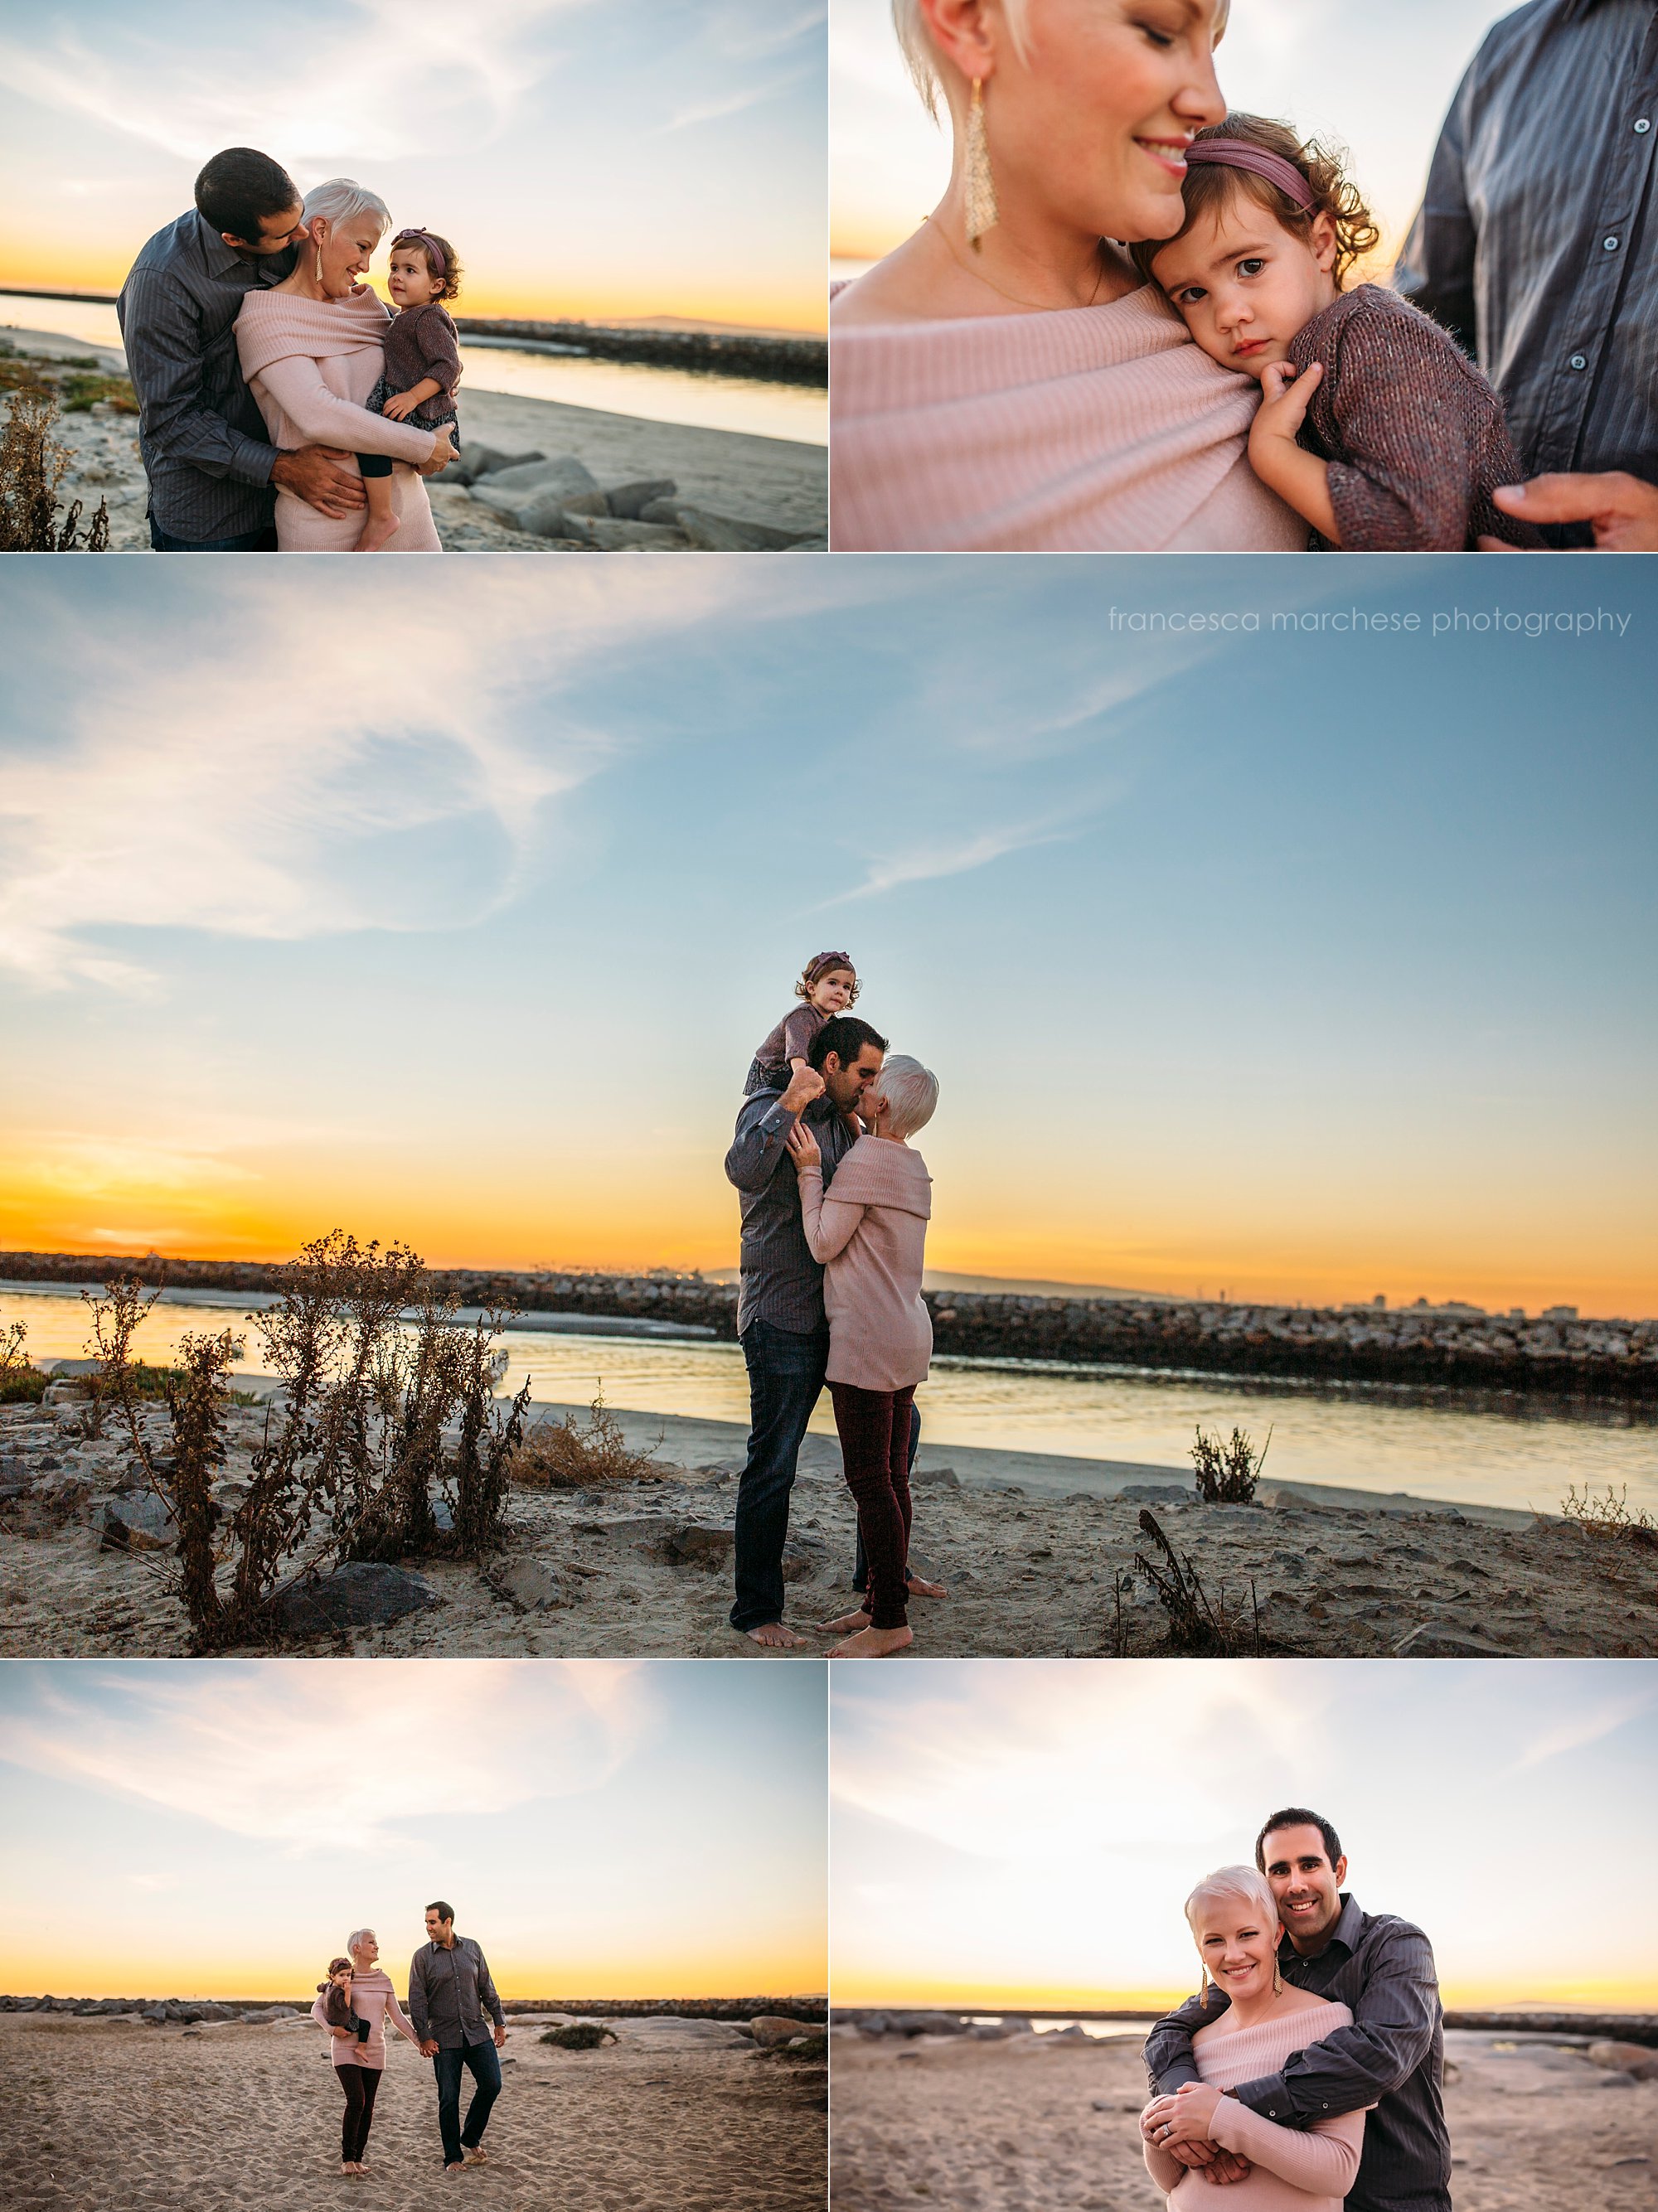 family of 3 - Francesca Marchese Photography Orange County Los Angeles Southern California Family Photographer